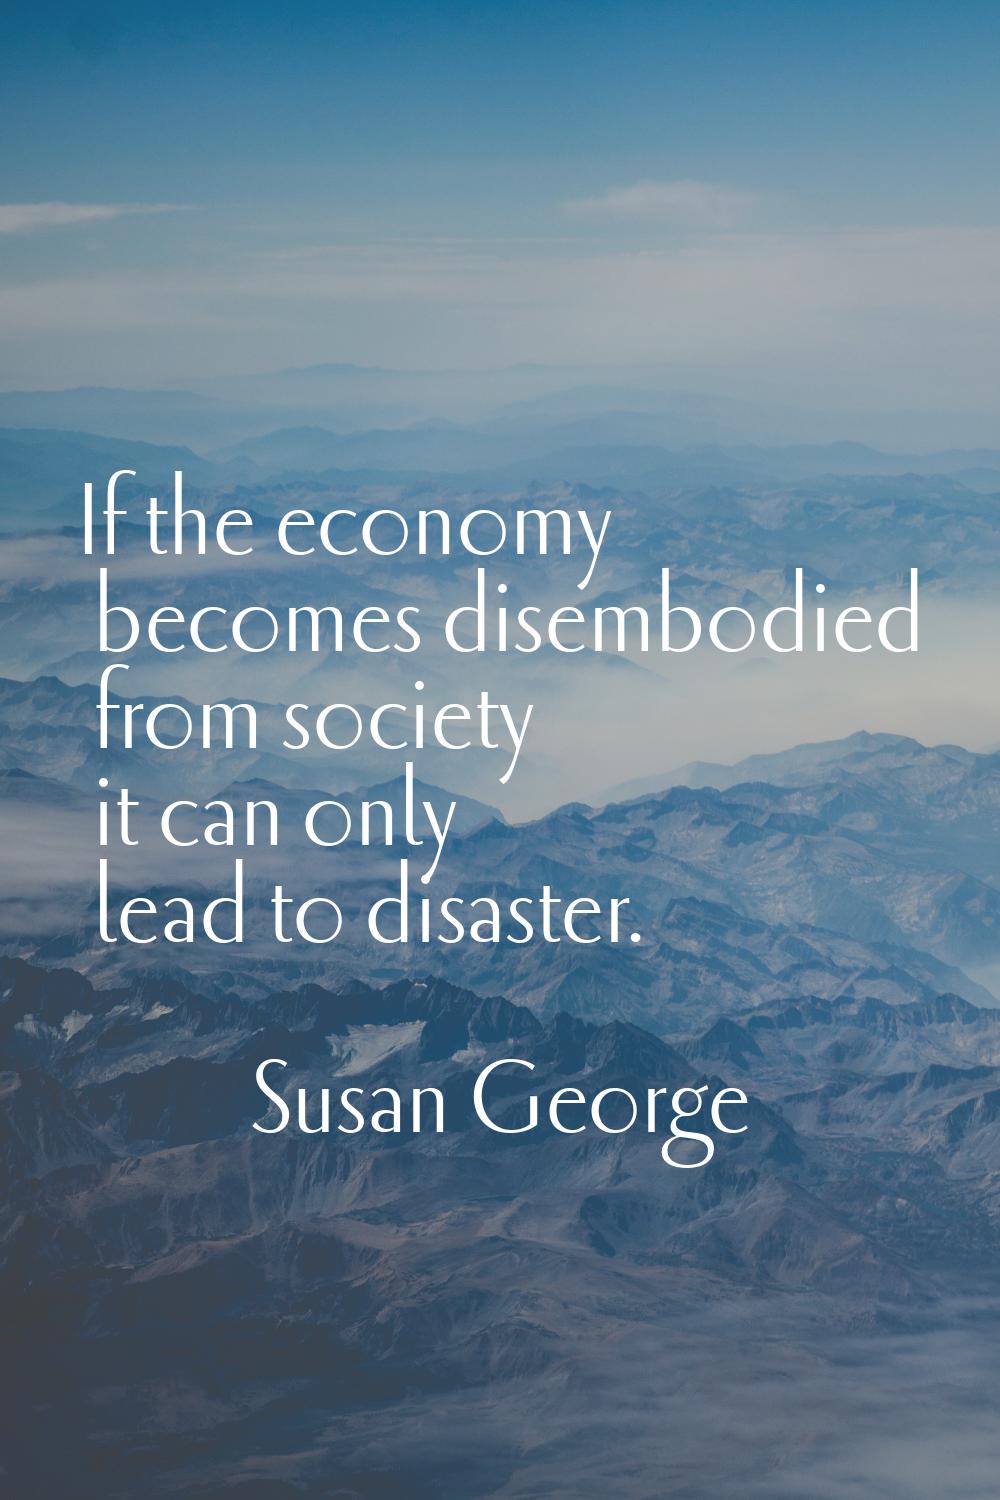 If the economy becomes disembodied from society it can only lead to disaster.